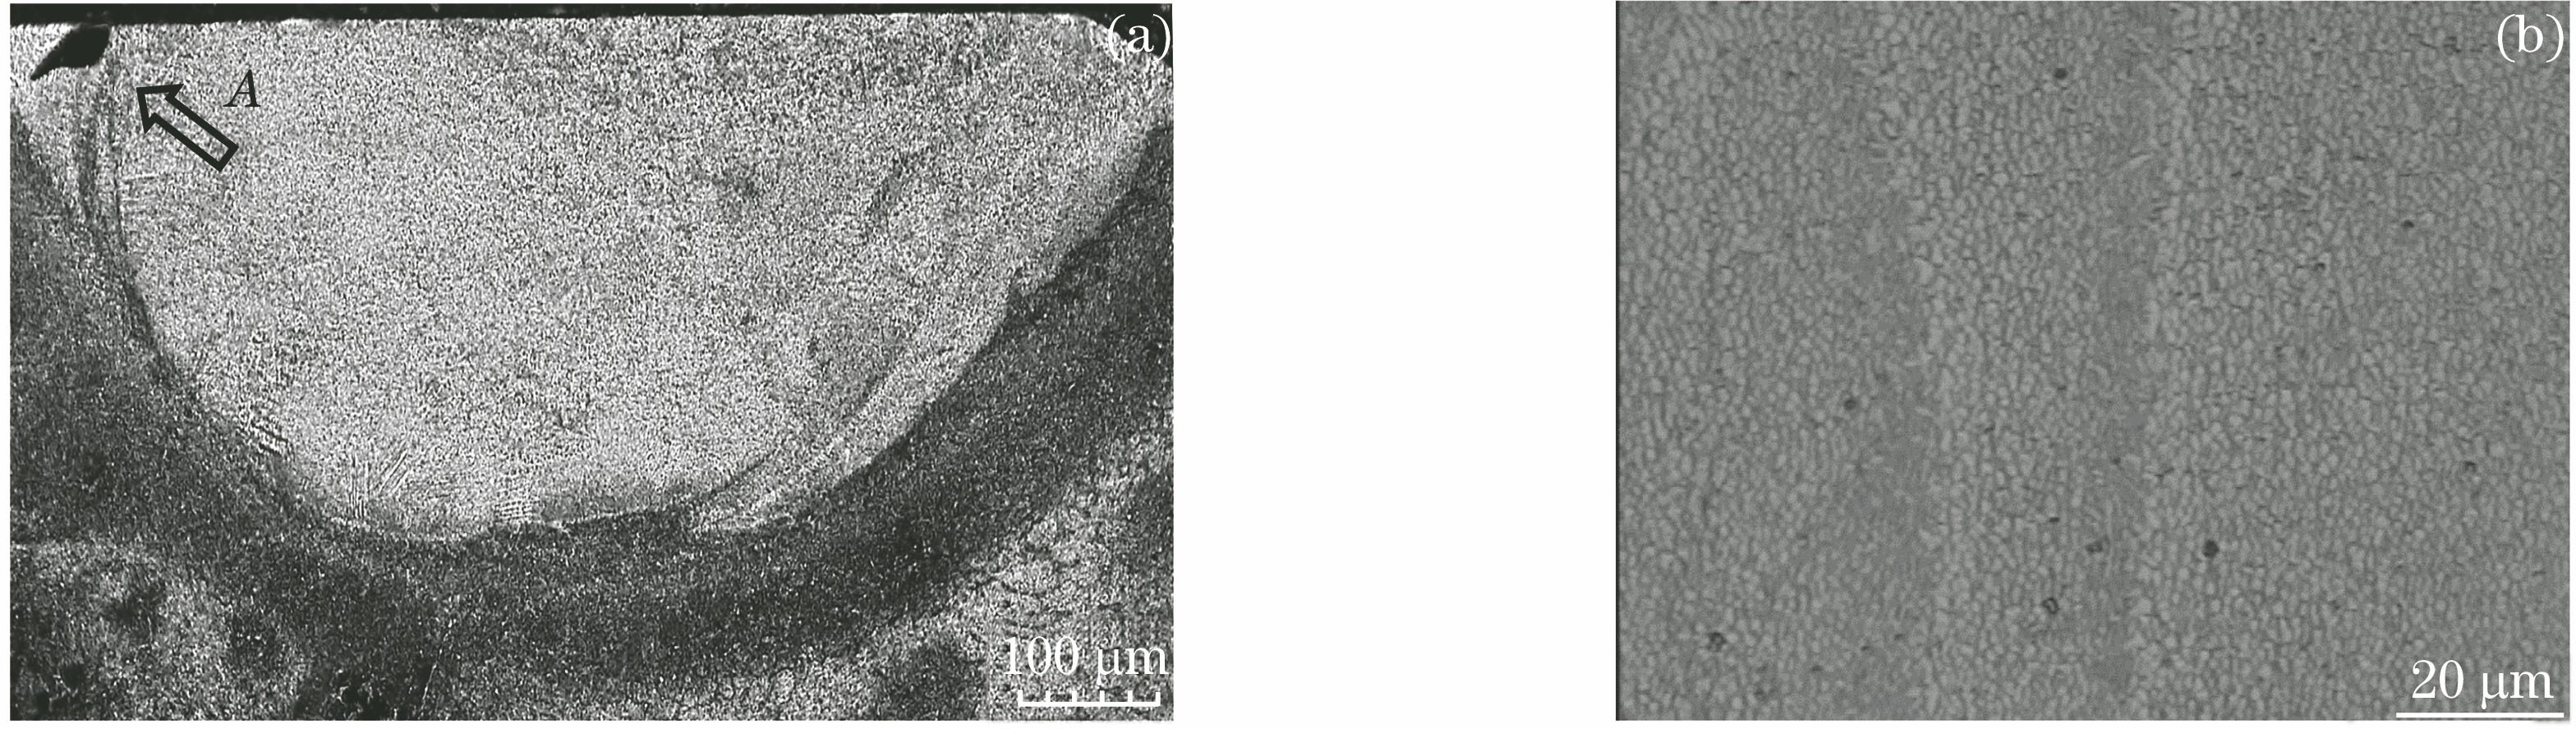 Microstructures of Ni-based WC cladding stripes. (a) Cross-sectional view; (b) organization structure